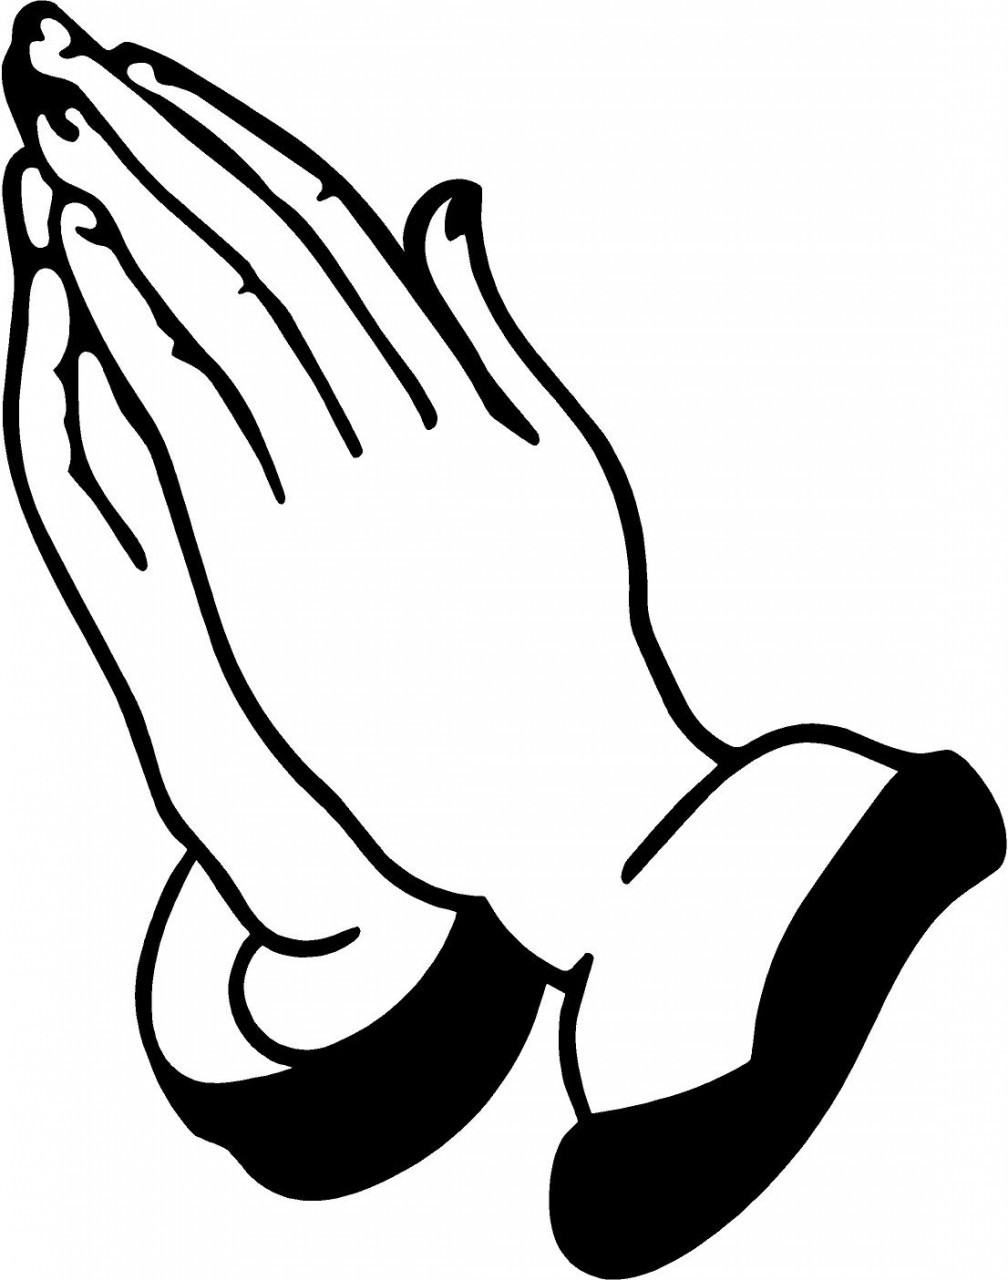 free clipart praying hands black and white - photo #26